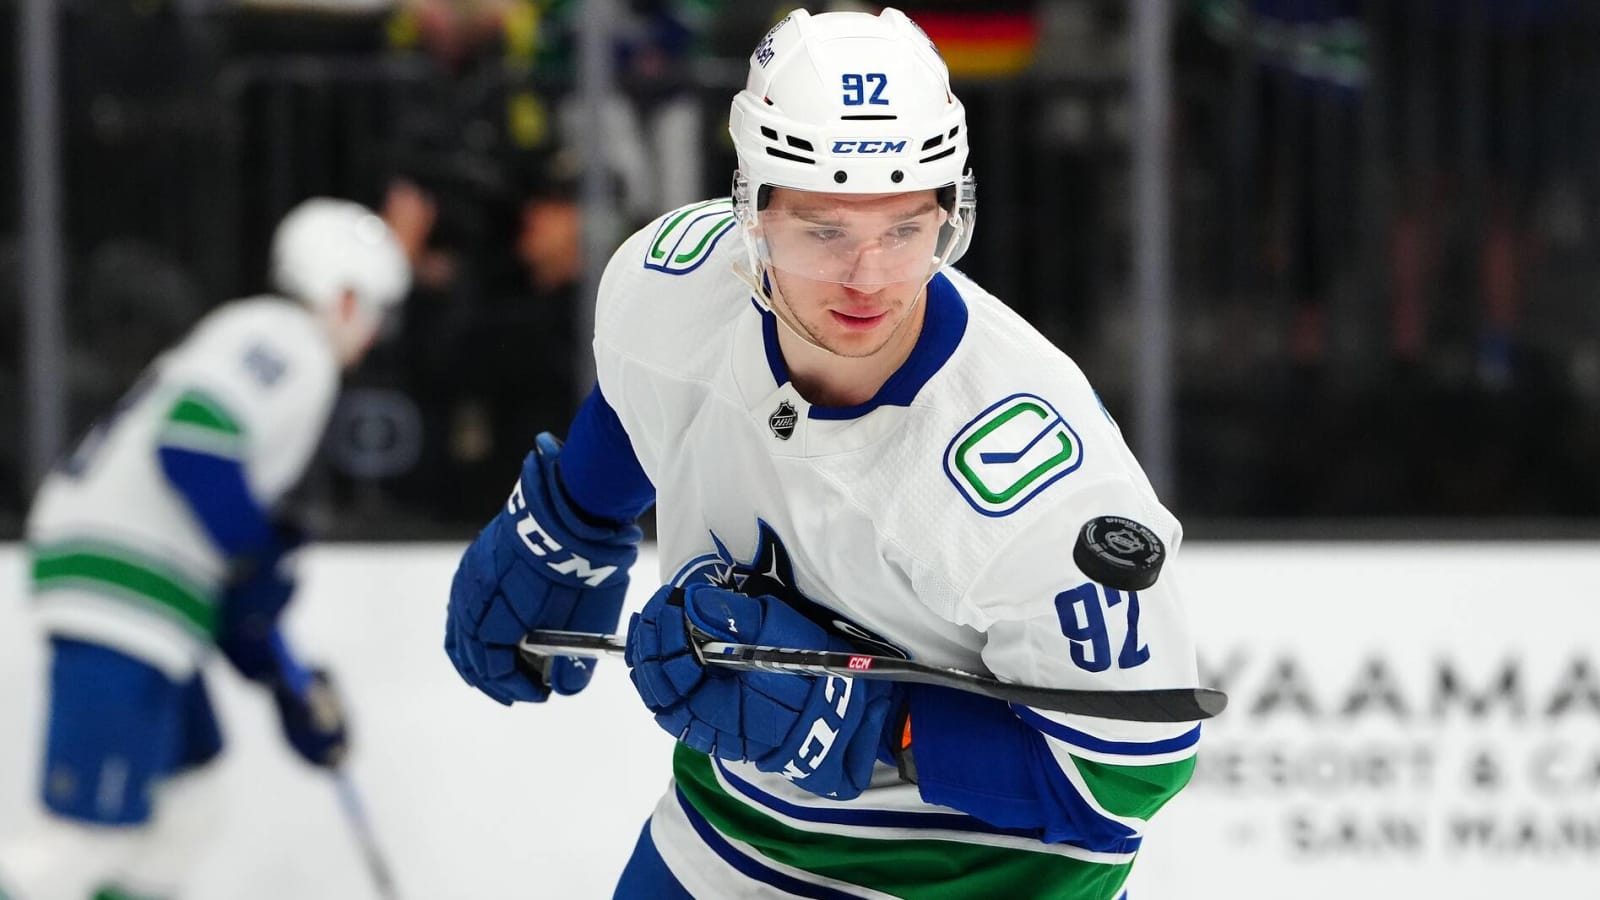 The Canucks reuniting the Podkolzin/Pettersson duo is worth a playoff shot